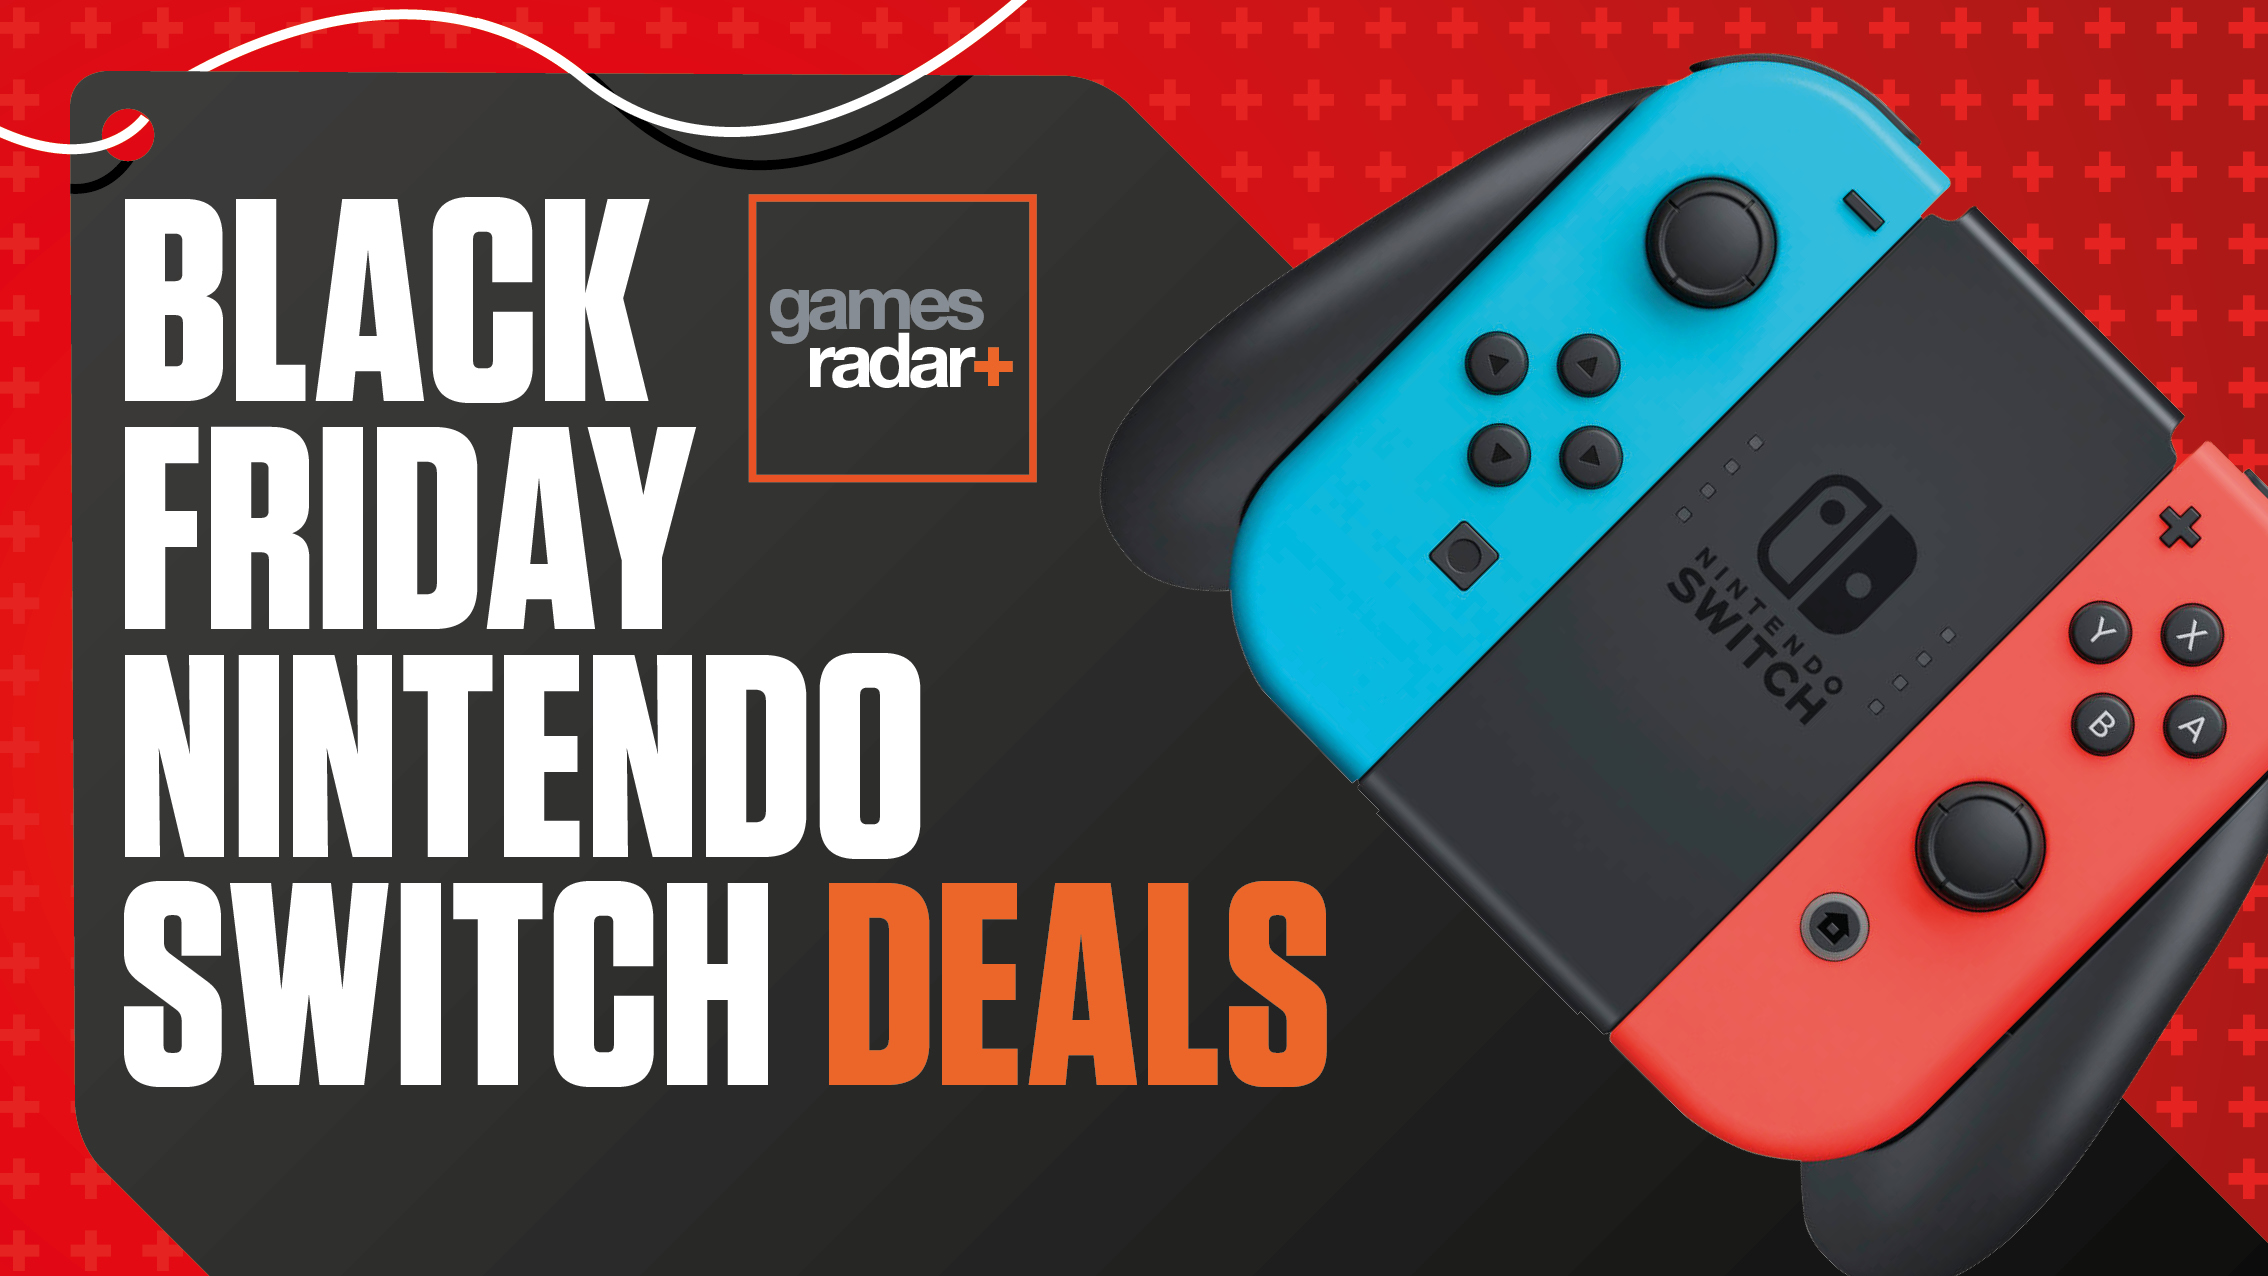 Nintendo Switch Black Friday Deals 2019 What Game And Switch Deals To Expect From Nintendo Gamesradar